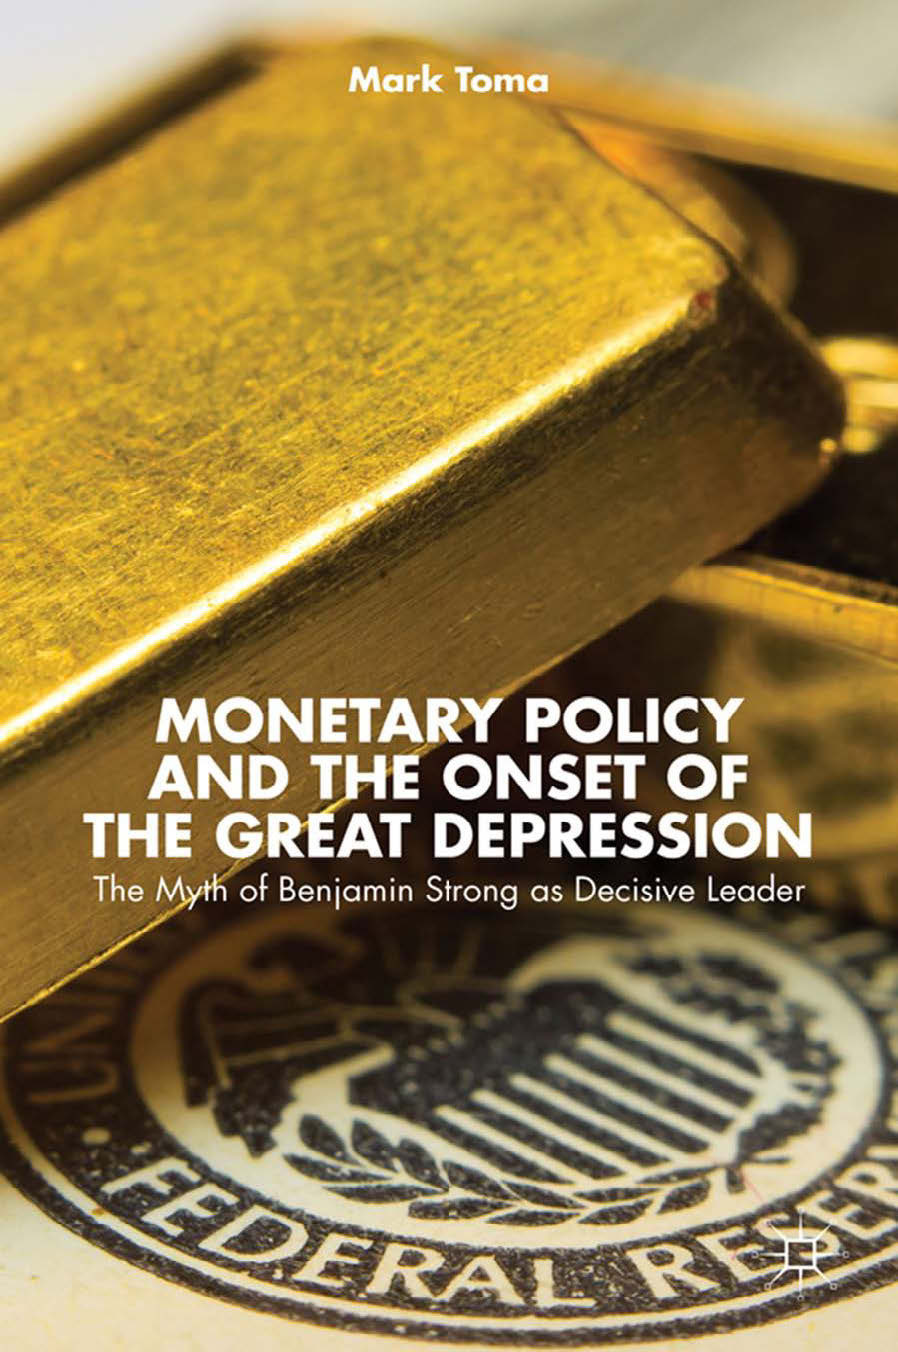 Toma, Mark - Monetary Policy and the Onset of the Great Depression, ebook